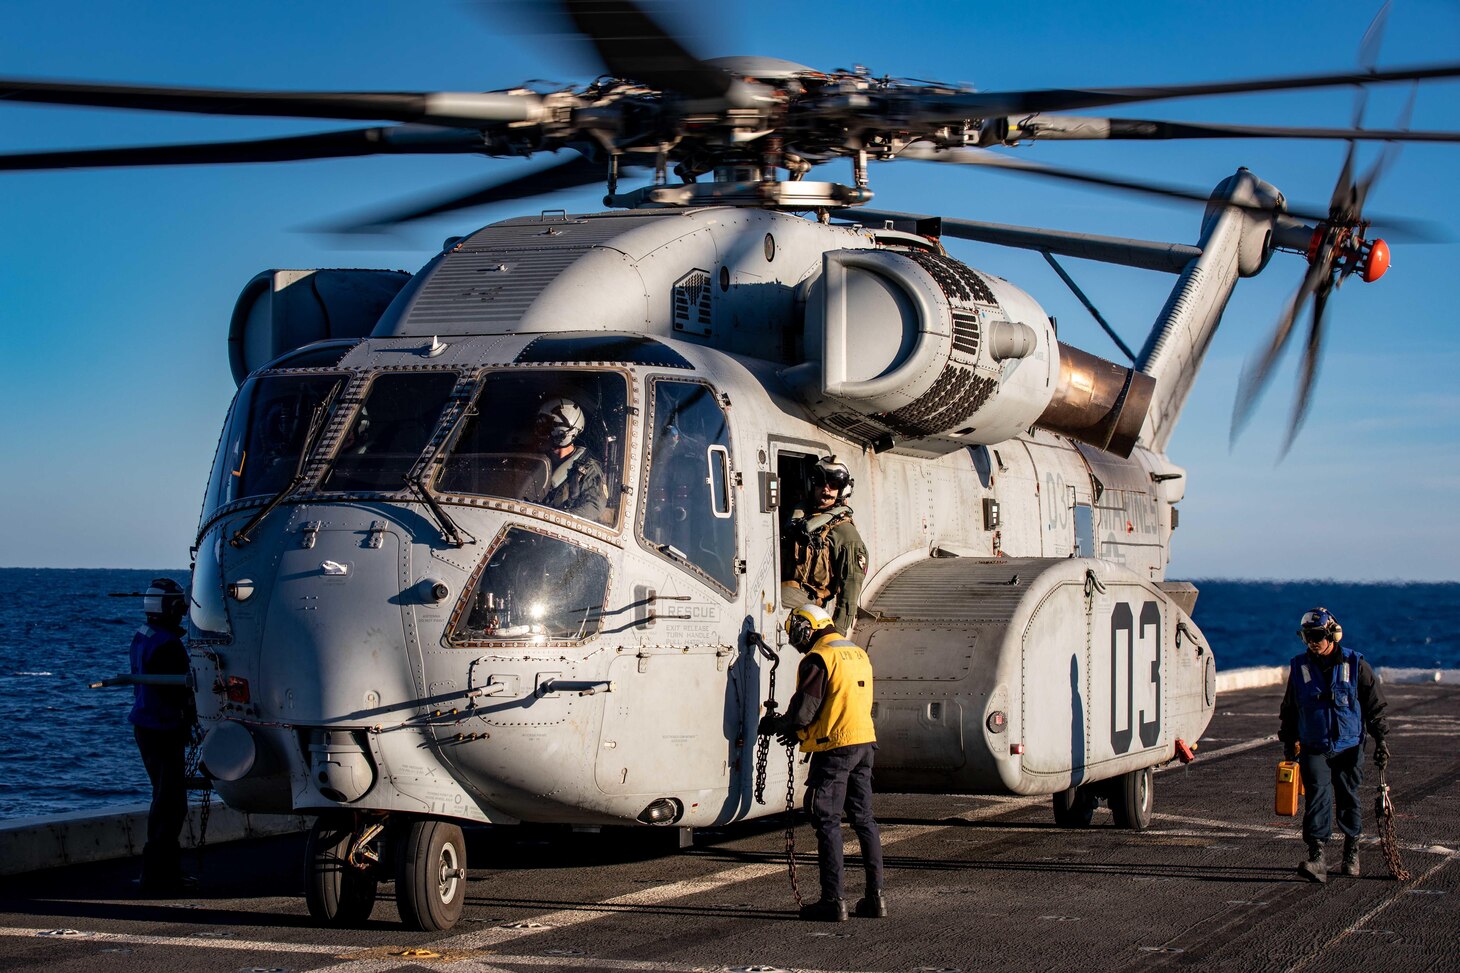 Sailors assigned to the San Antonio-class amphibious transport dock ship USS Arlington (LPD 24) remove chocks and chains from a CH-53K King Stallion helicopter during flight operations aboard Arlington, Feb. 14. The King Stallion is a heavy-lift cargo helicopter that underwent its second set of sea trials as the next evolution of the CH-53 series helicopters that have been in service since 1966.